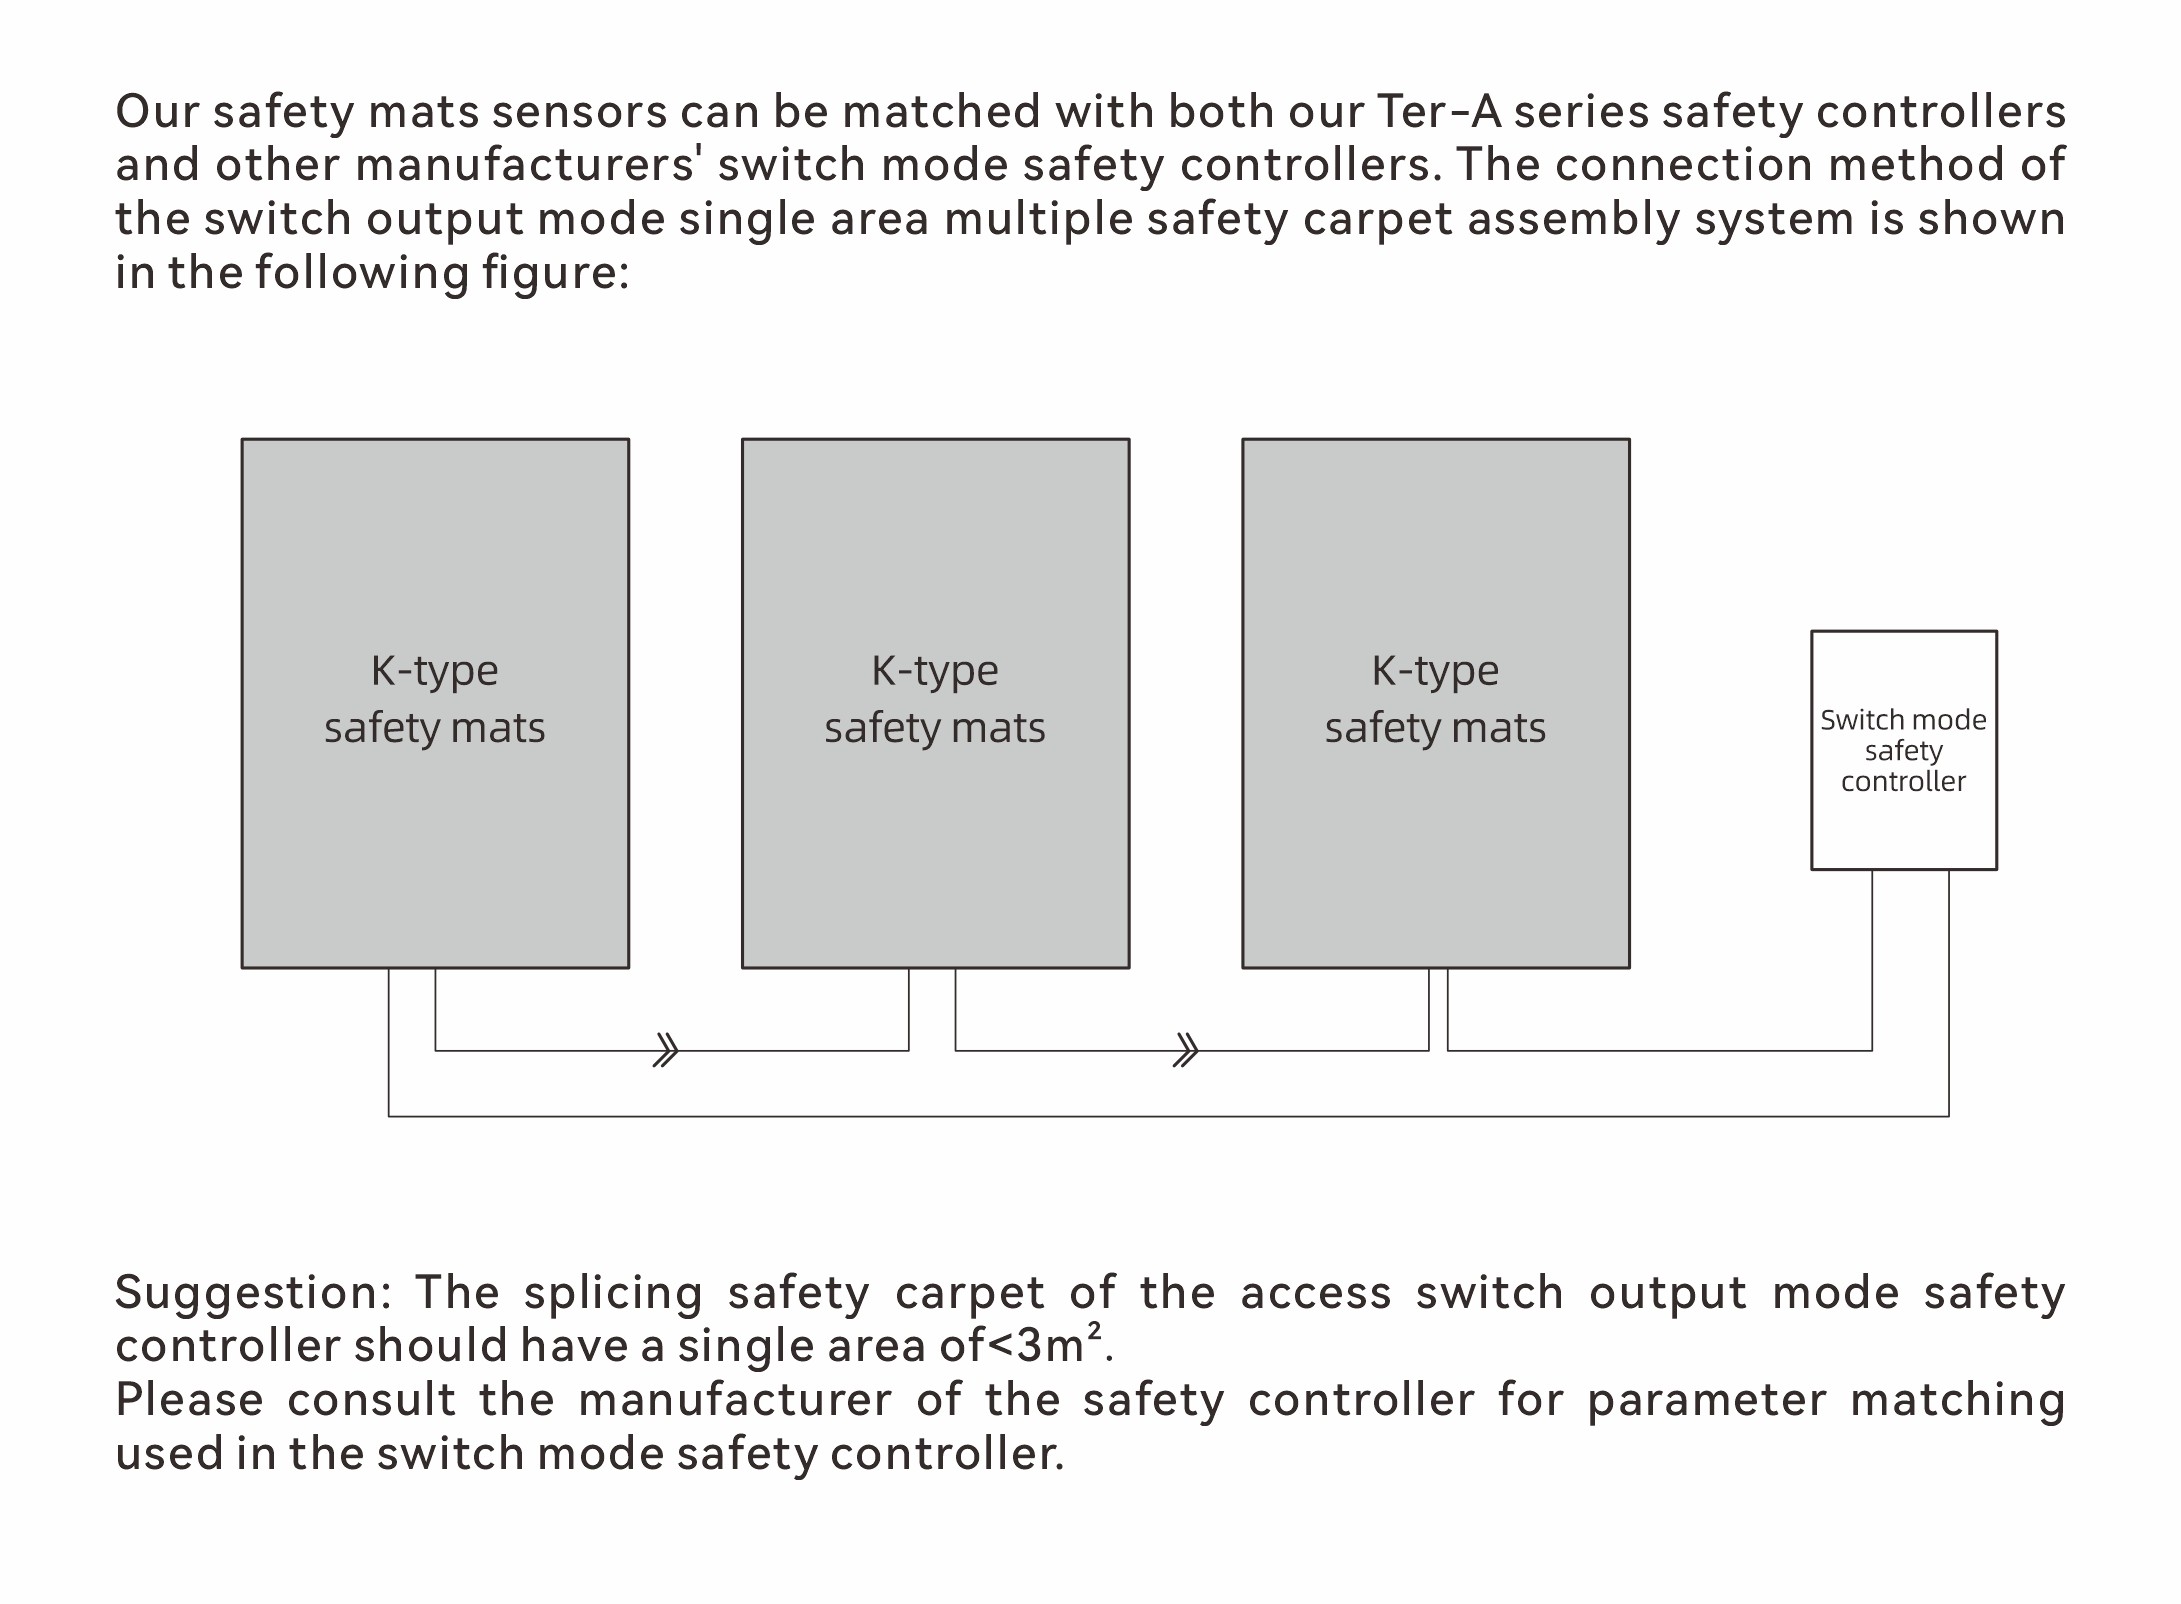 Splice Safety Mats For Connecting Switch Output Mode  Safety Controller